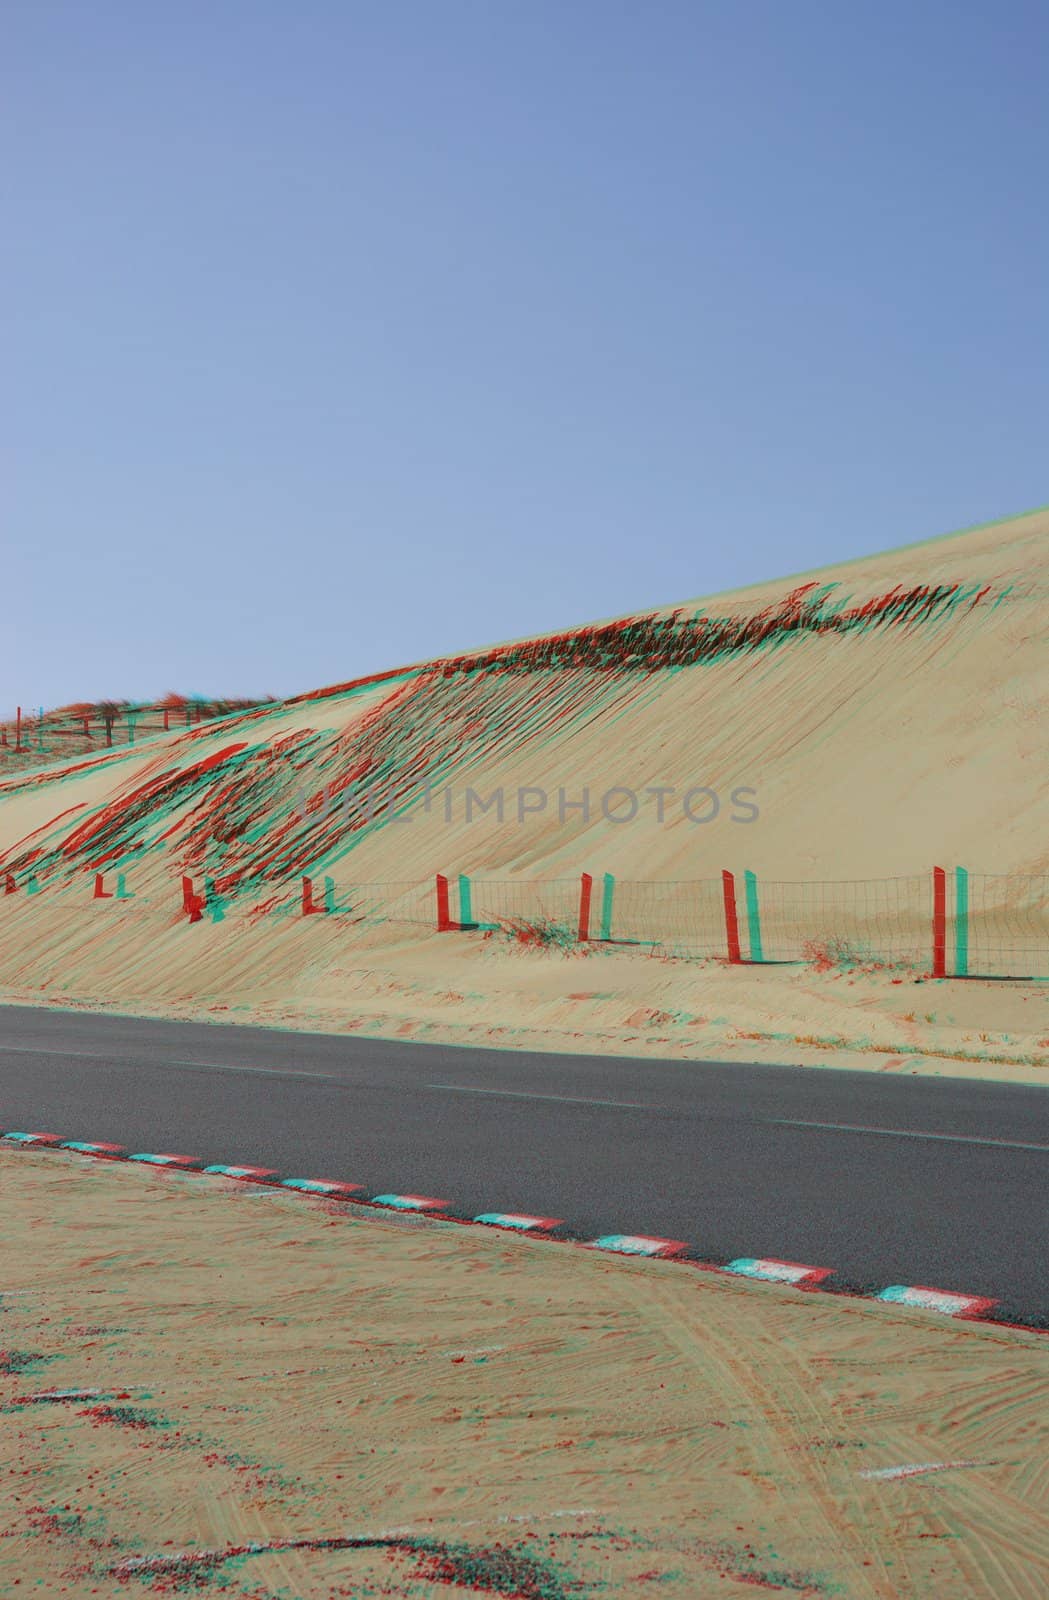 Isolated dunes landscape with a road and with a real stereoscopic effect by shkyo30